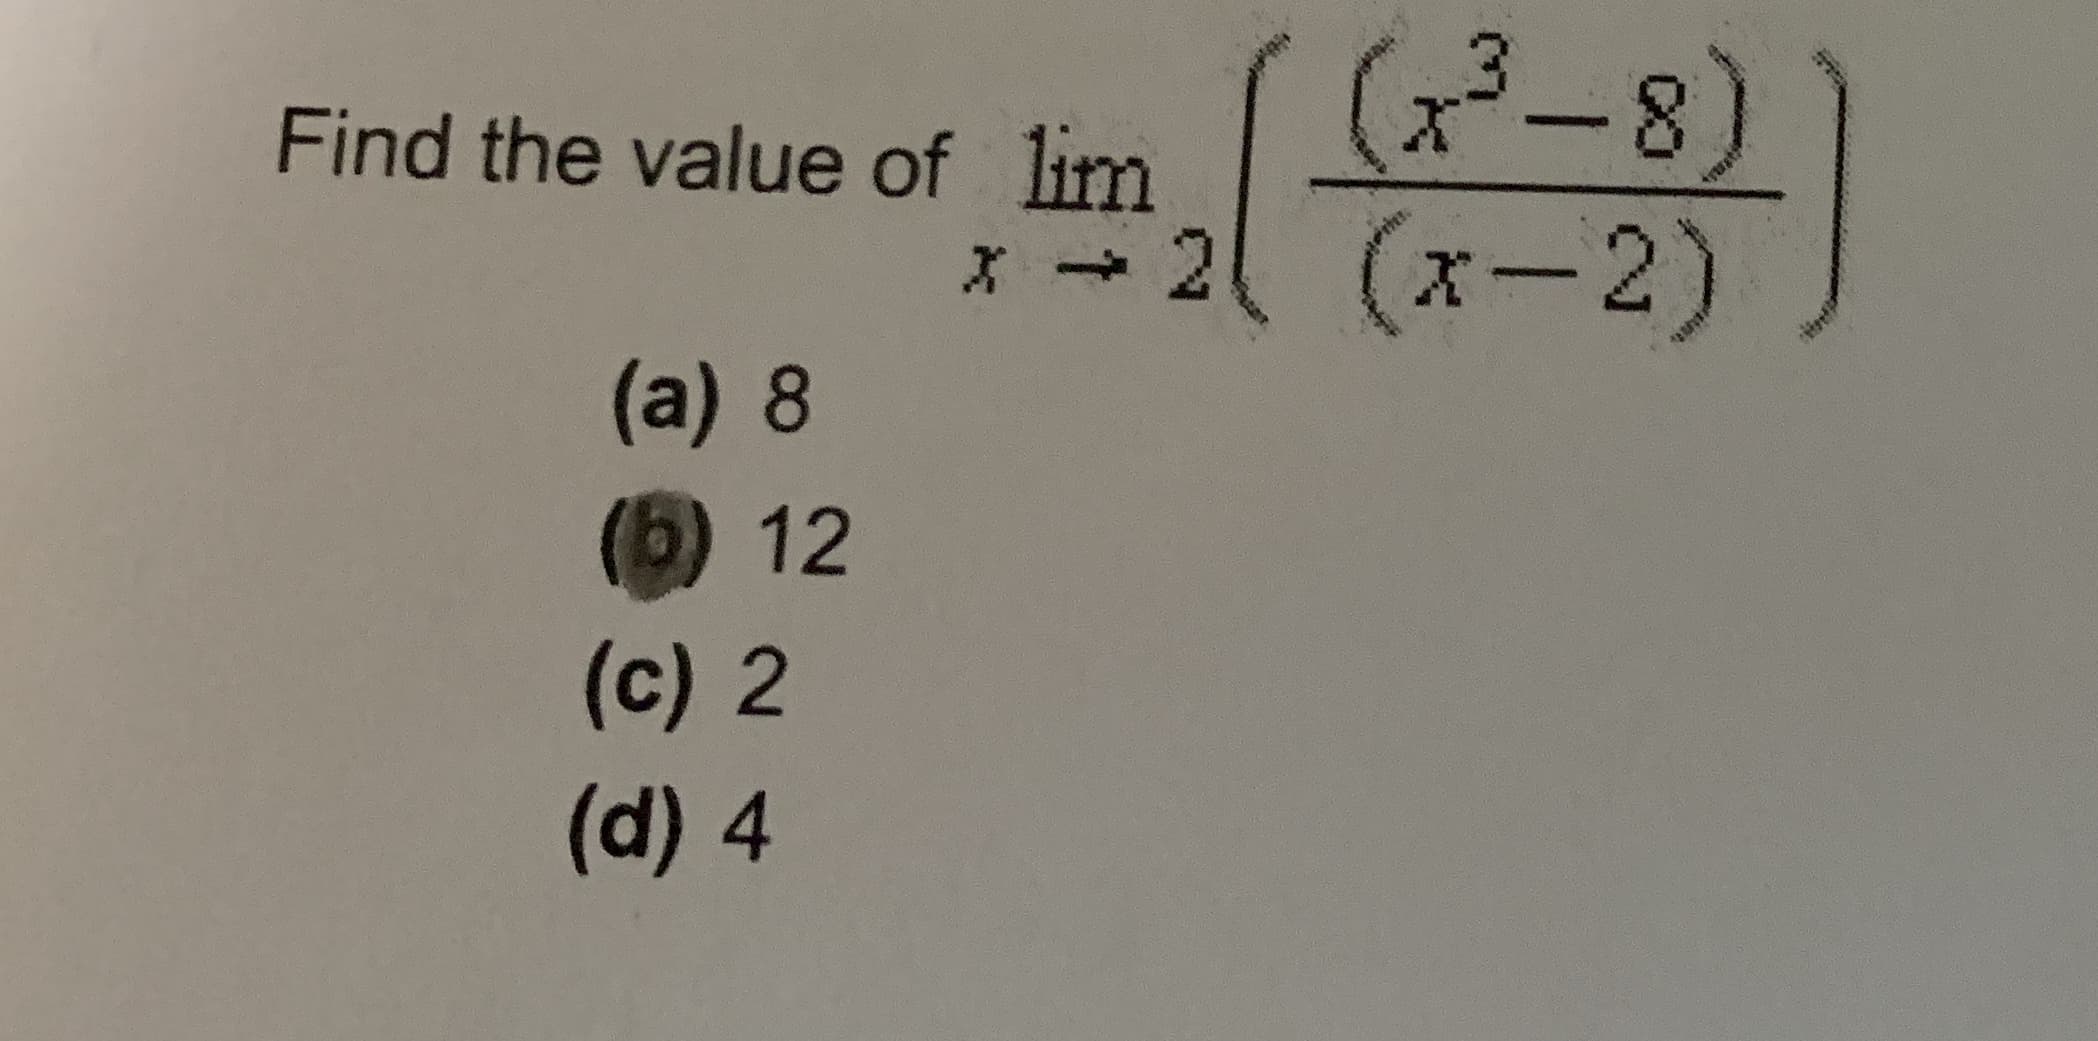 (2-8)
(x-2)
Find the value of lim
(a) 8
(5) 12
(c) 2
(d) 4
